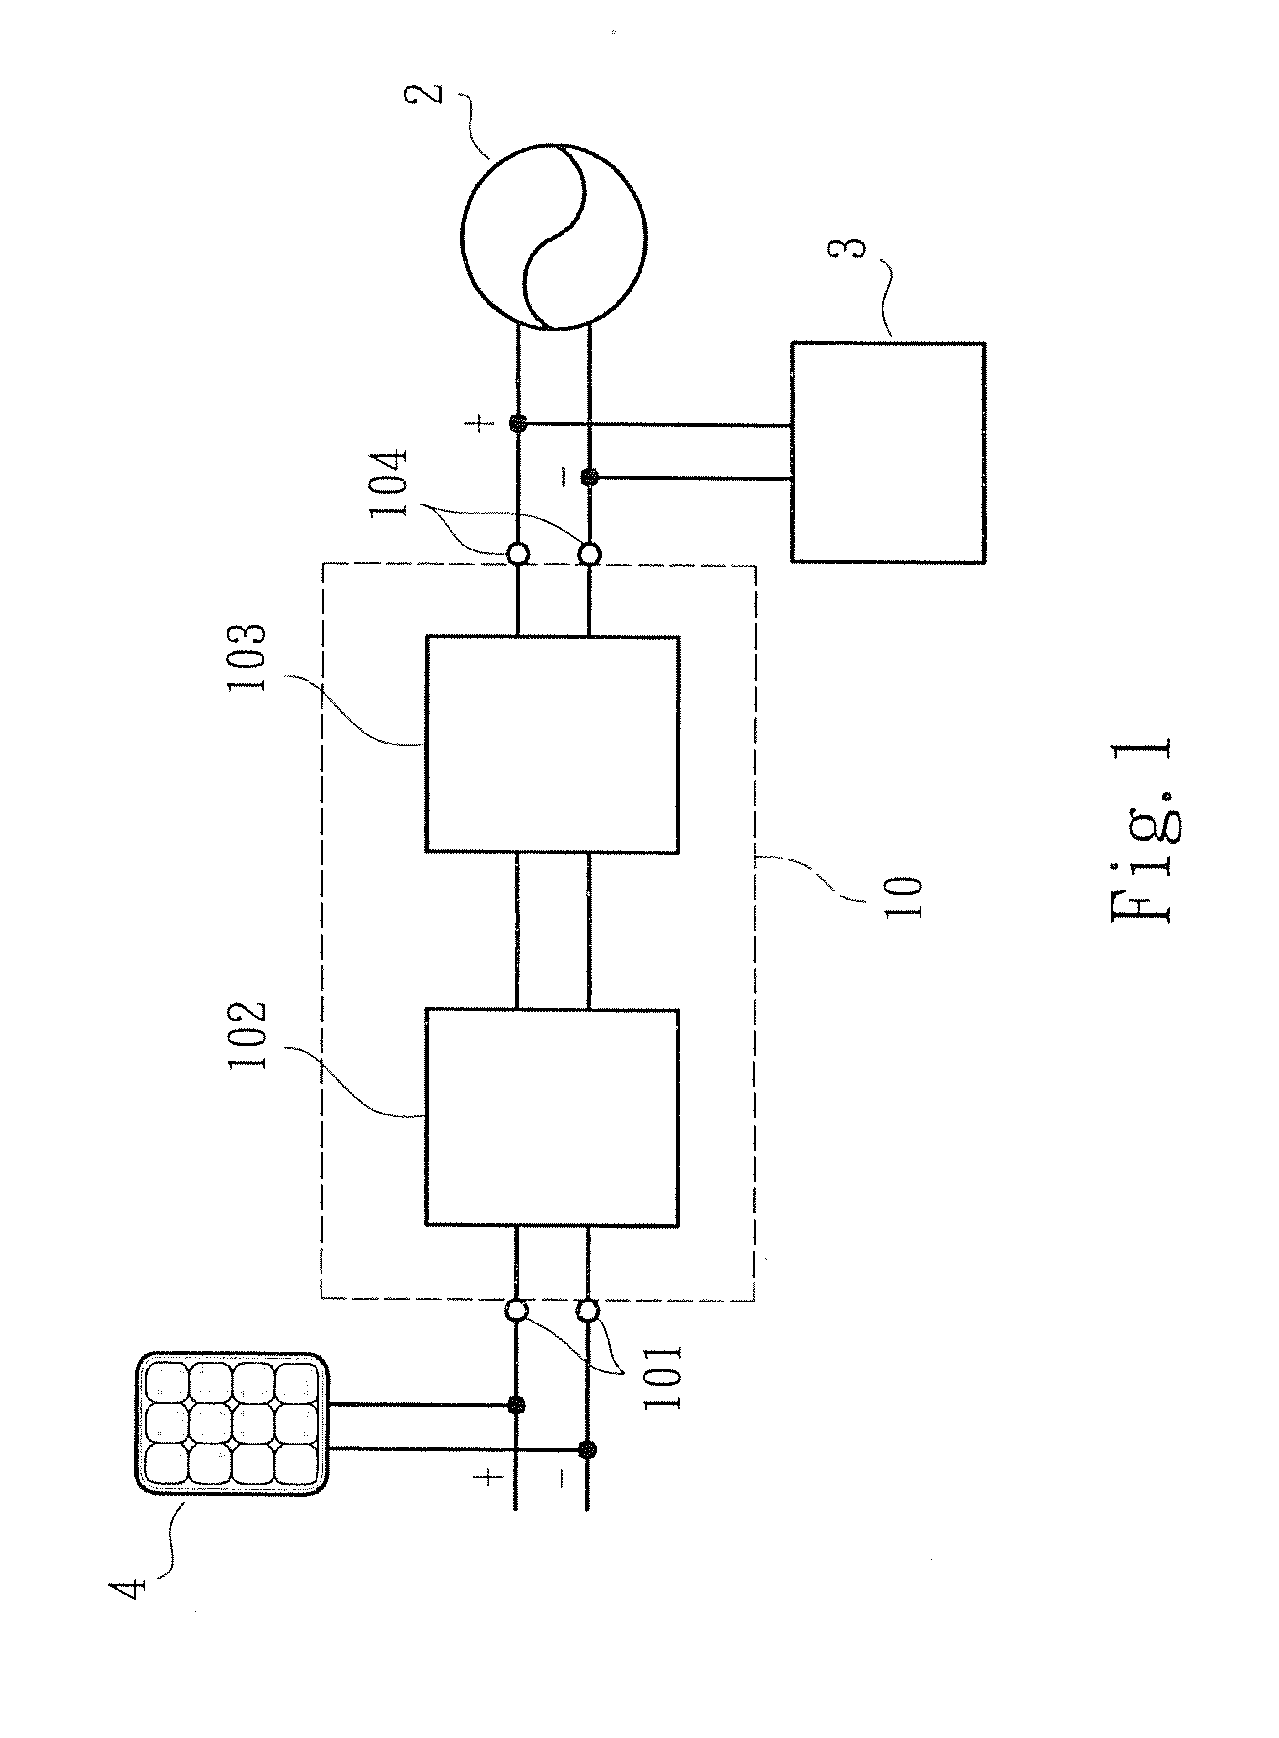 Power conversion device for solar energy generating system